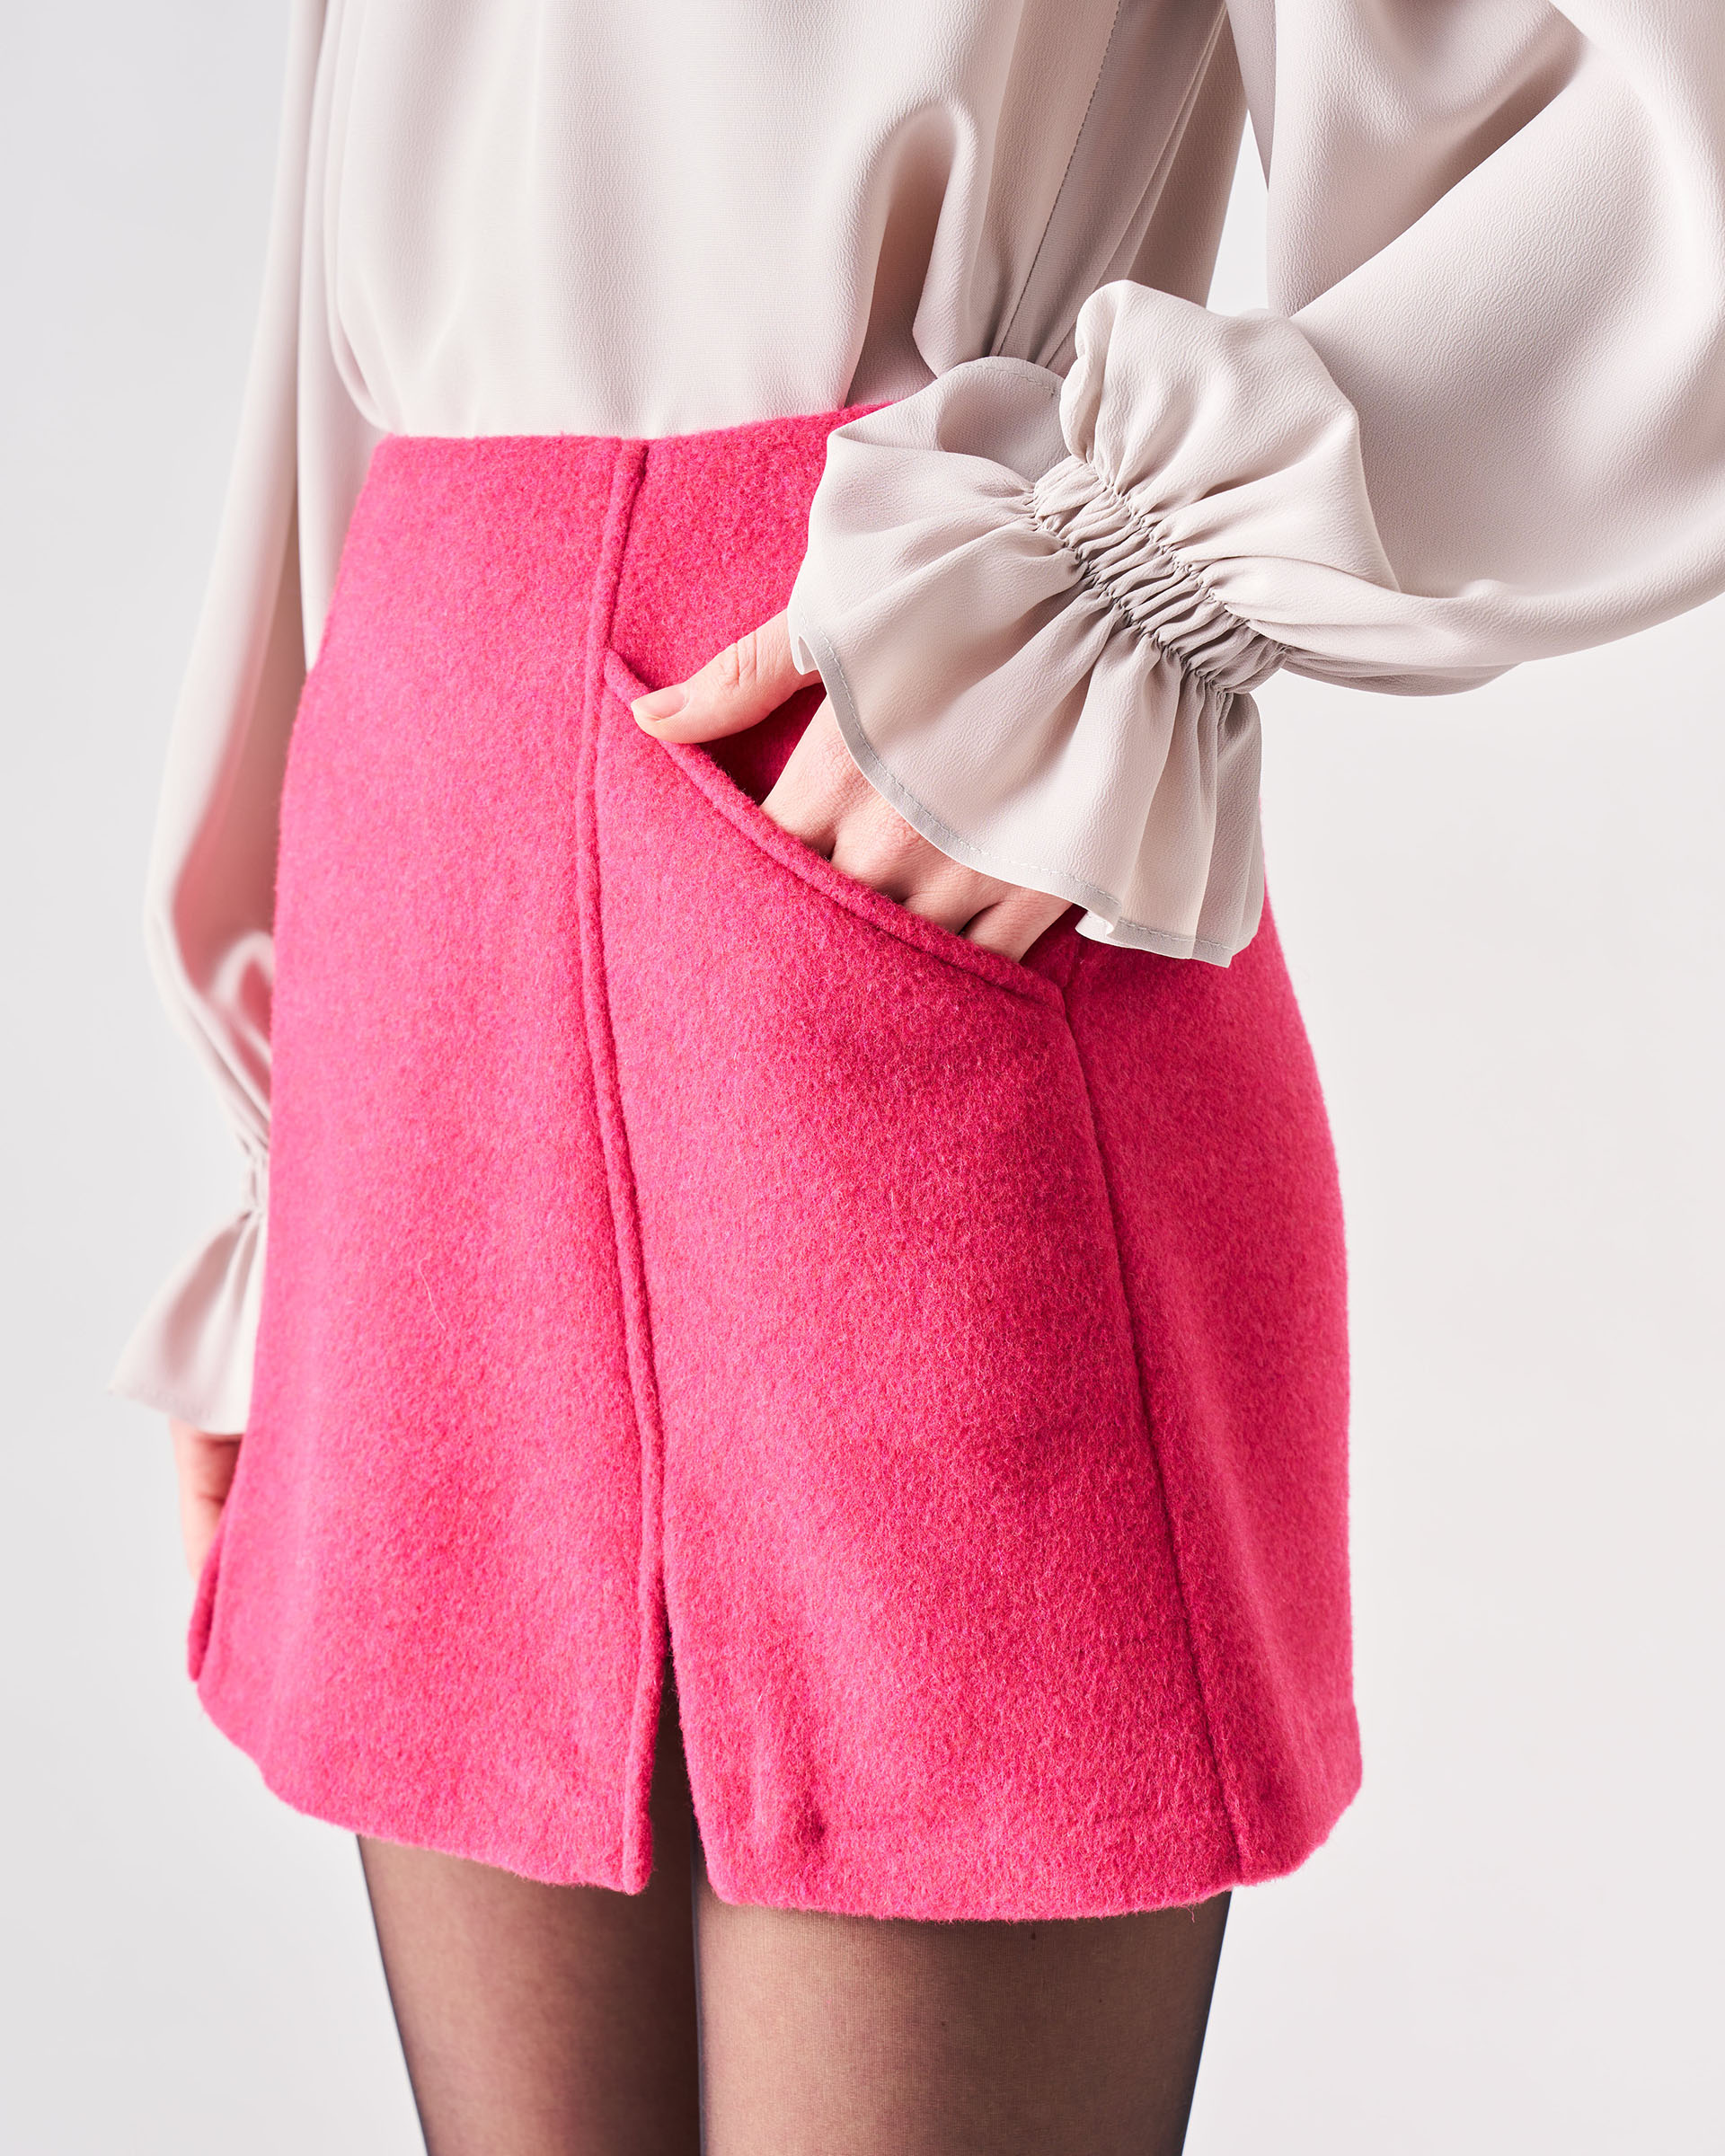 The Market Store | Cloth Skirt